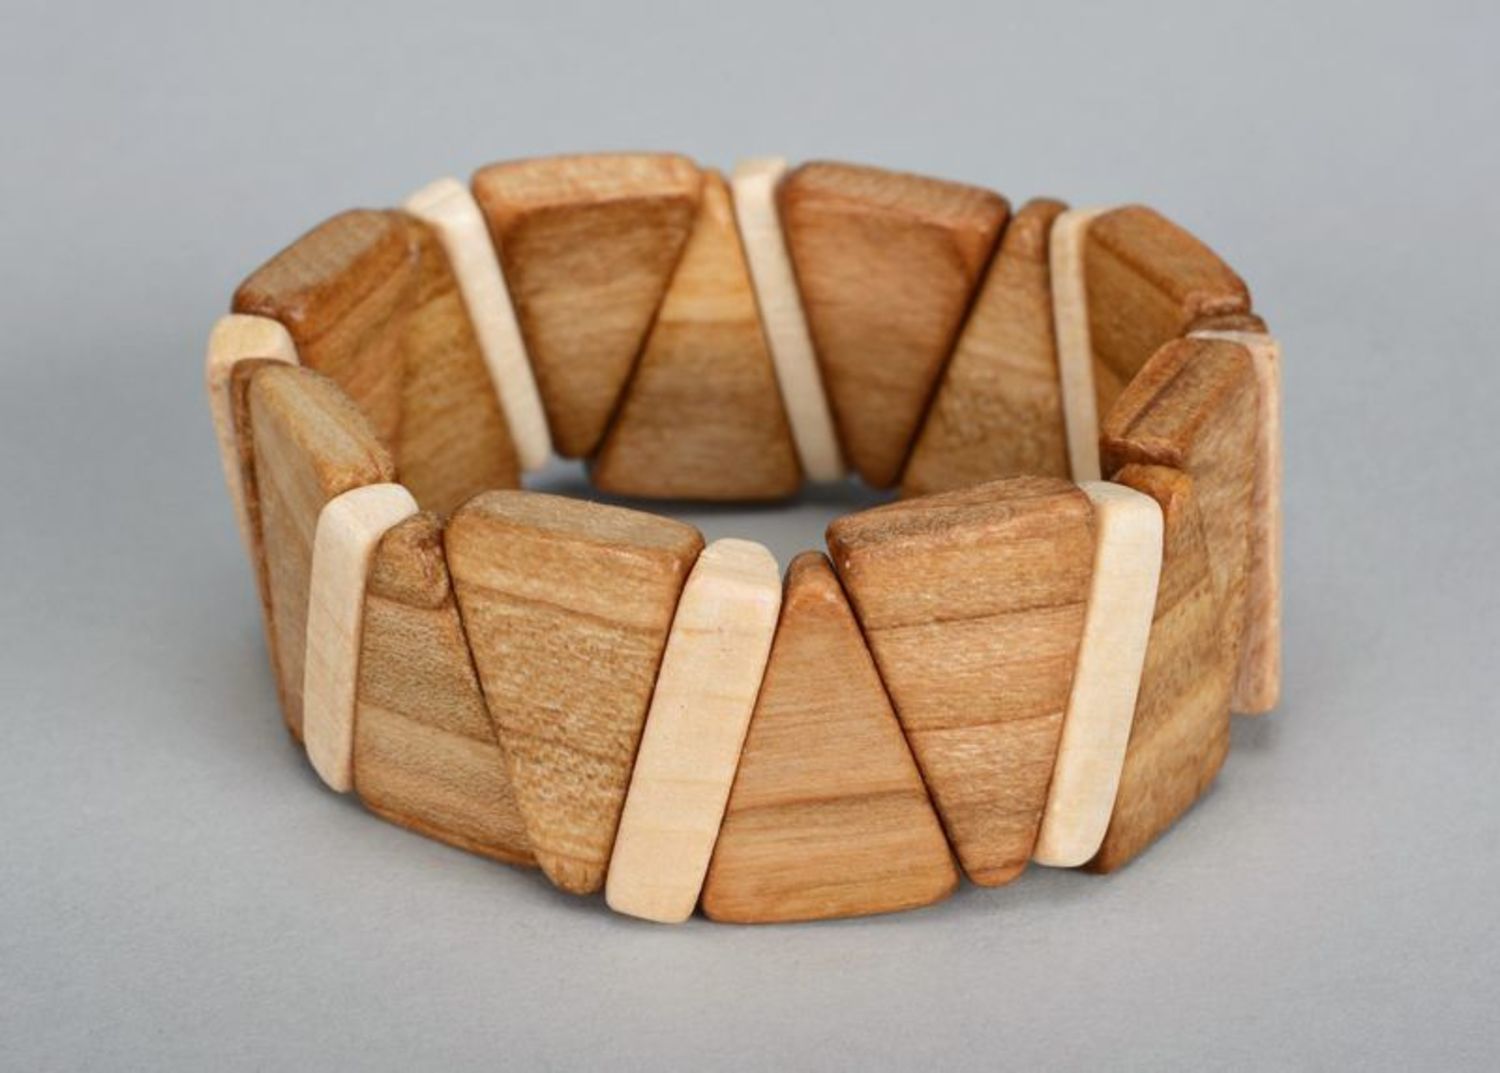 Wooden bracelet on elastic band made from triangular pieces photo 2